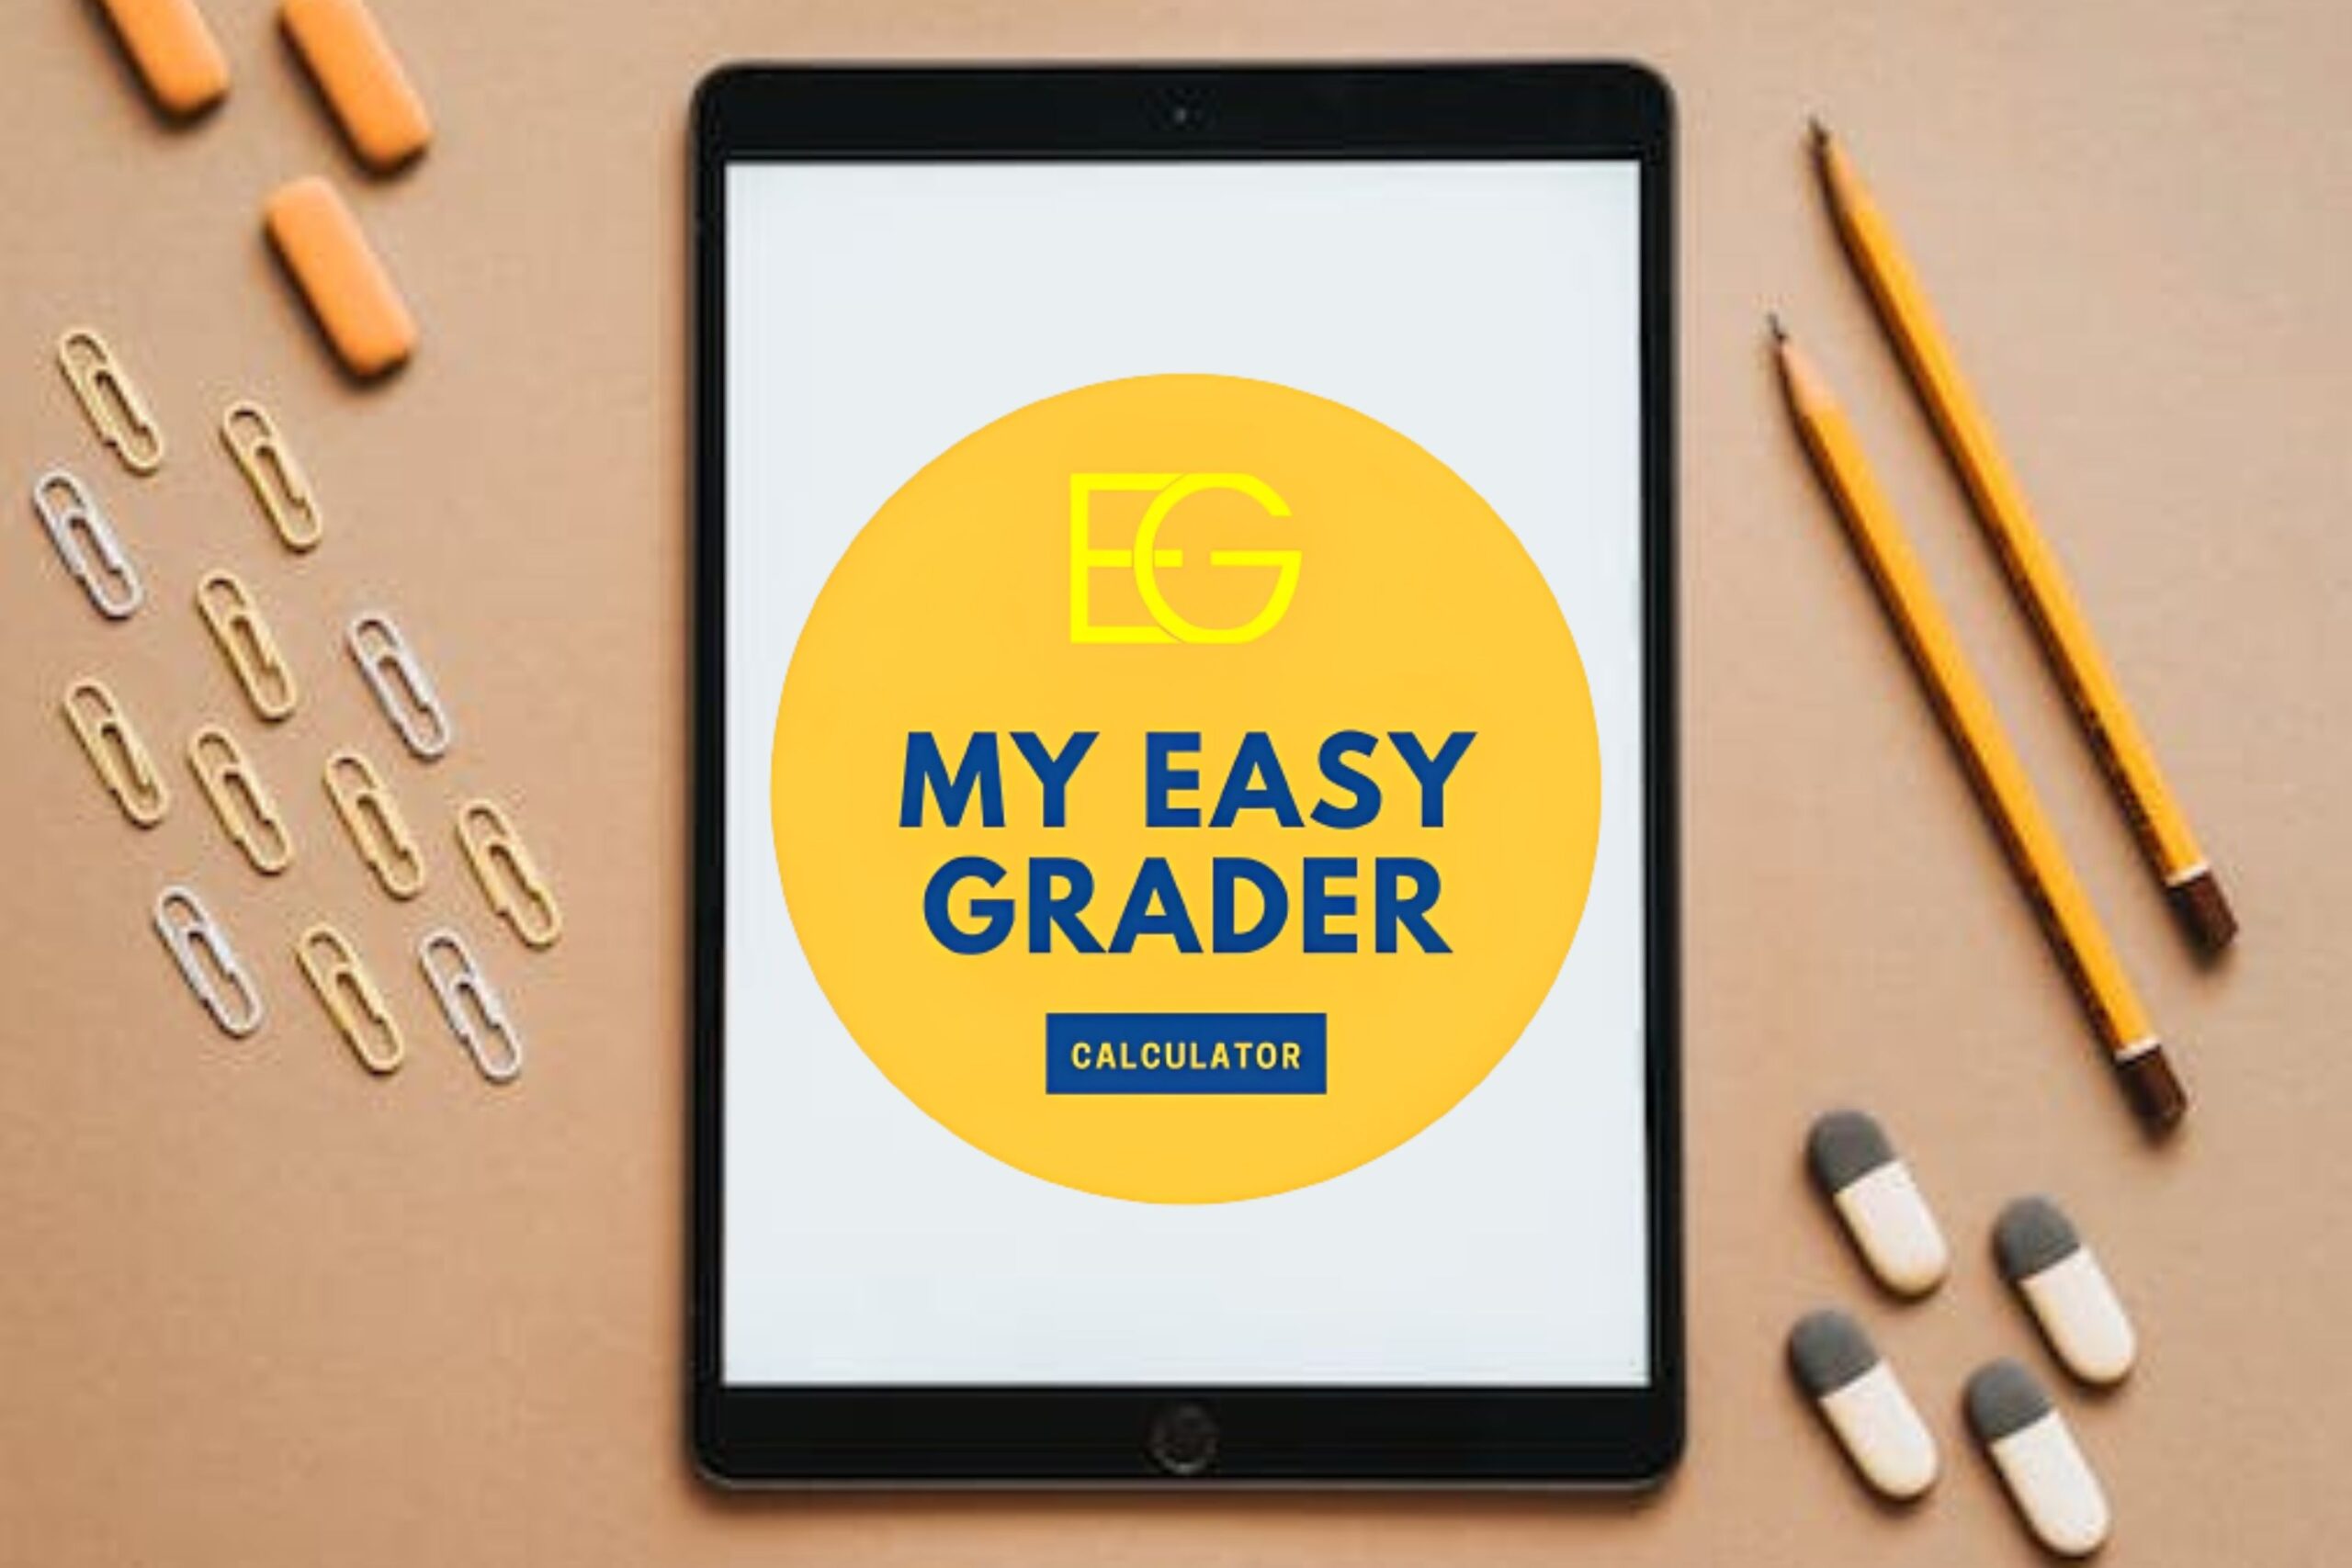 My Easy Grader Calculator – Best for Reliable Grade Calculation